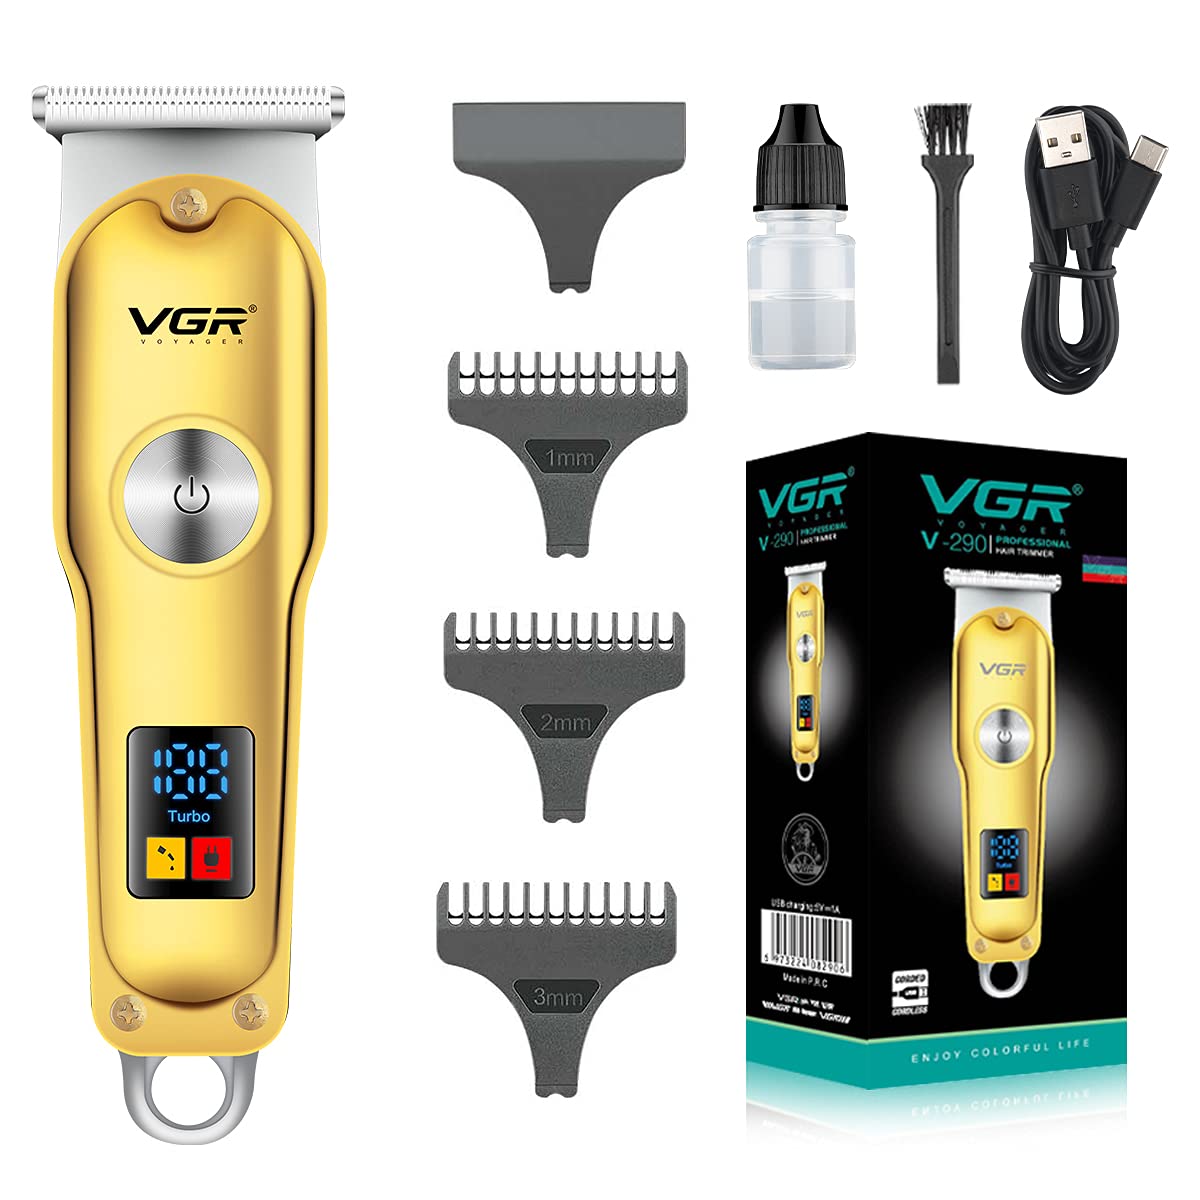 VGR V-290 Digital Display Professional Cordless Hair Clippers Cutter Rechargeable Wireless Hair Grooming Set Beard Trimming Beard Styling Rechargeable Li-ion Battery 600mAh 120 mins Runtime -